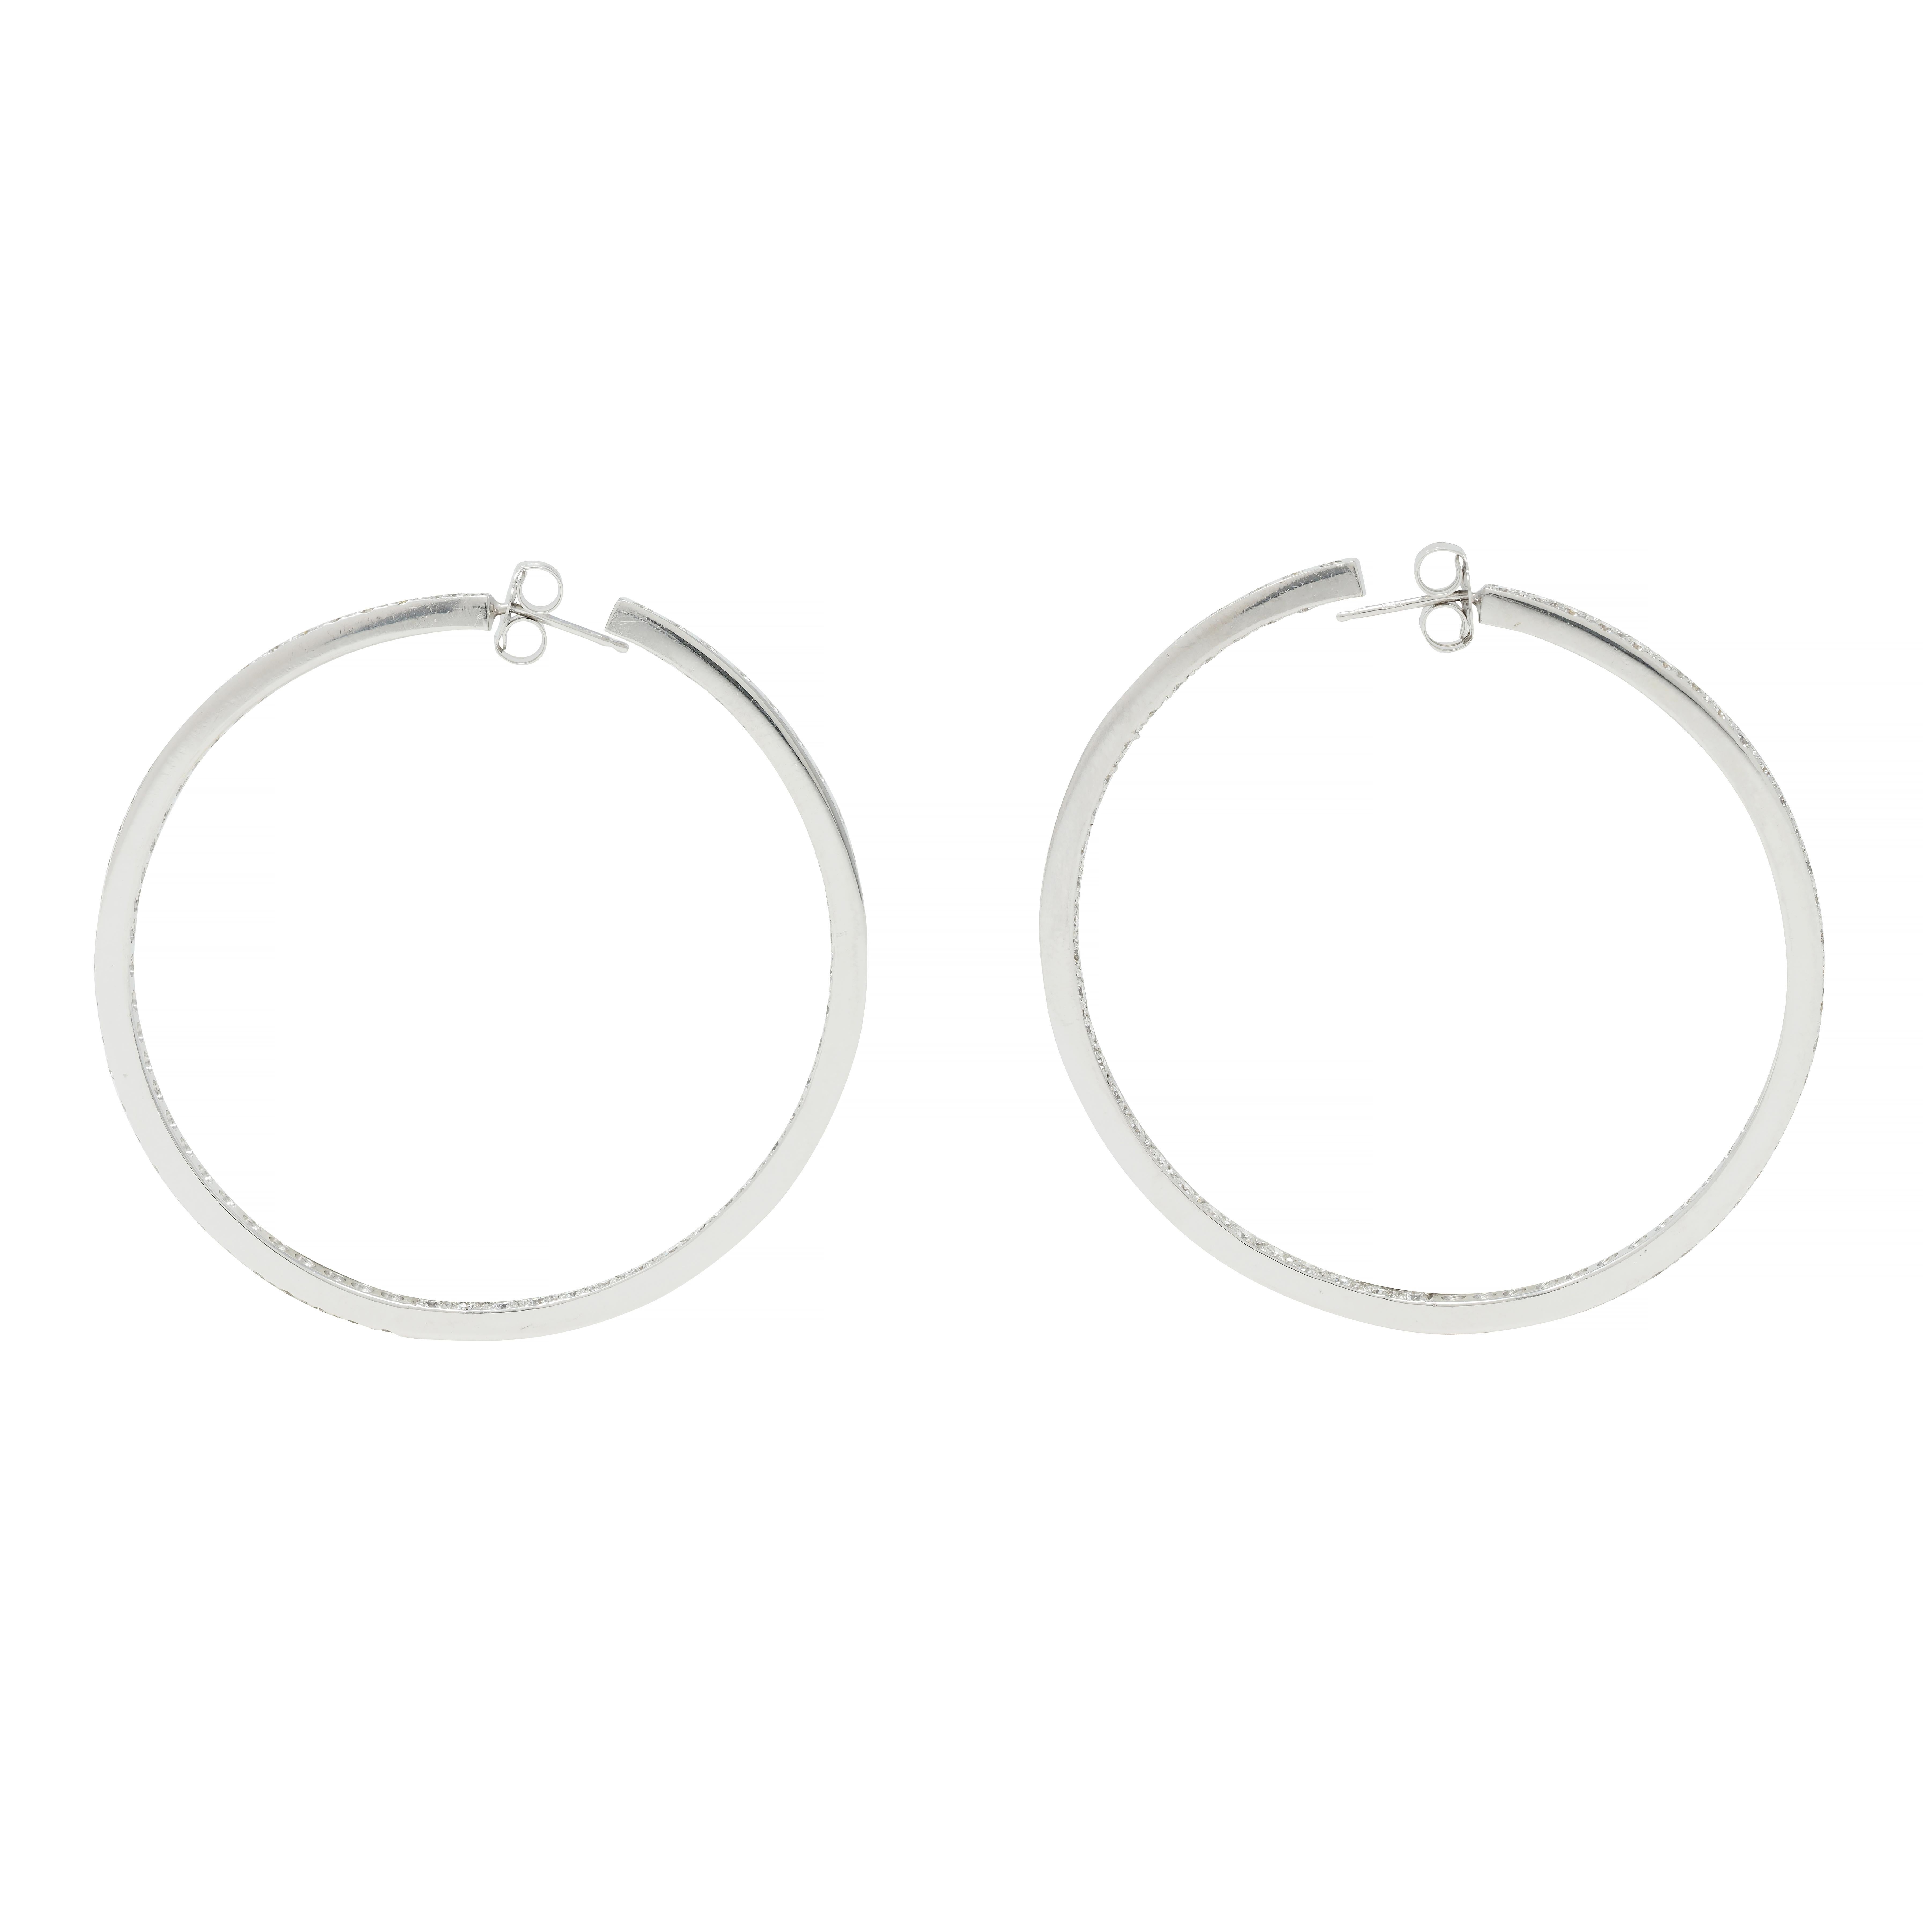 Designed as round white gold open hoops with round brilliant cut diamonds
Bead set inside-outside style with an interior row and exterior row 
Weighing approximately 3.60 carats total 
G/H color with VS2 clarity
With high polish edges
Completed by